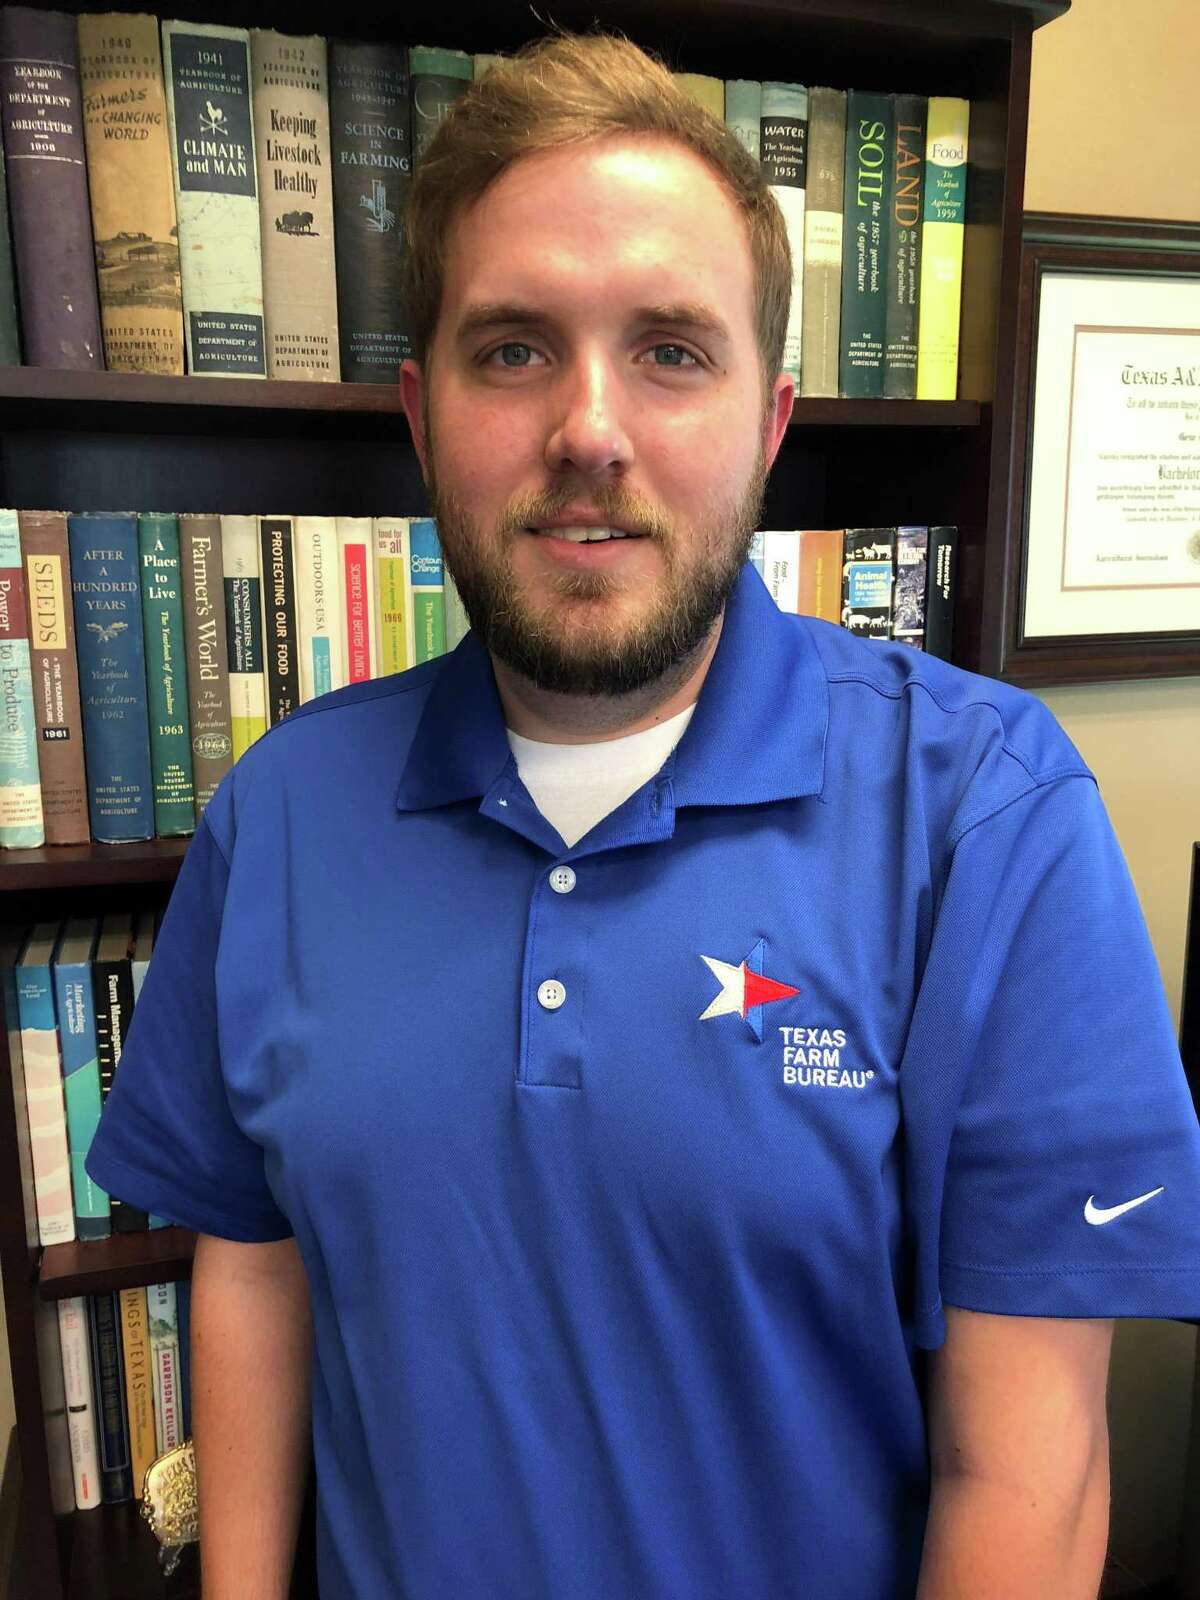 Justin Walker, a member of the communications staff at the Texas Farm Bureau, in a TFB shirt co-branded with the Nike logo. The Texas Farm Bureau, wanting to avoid appearing to take a political stance, has asked personnel not to wear the Nike-logoed shirts